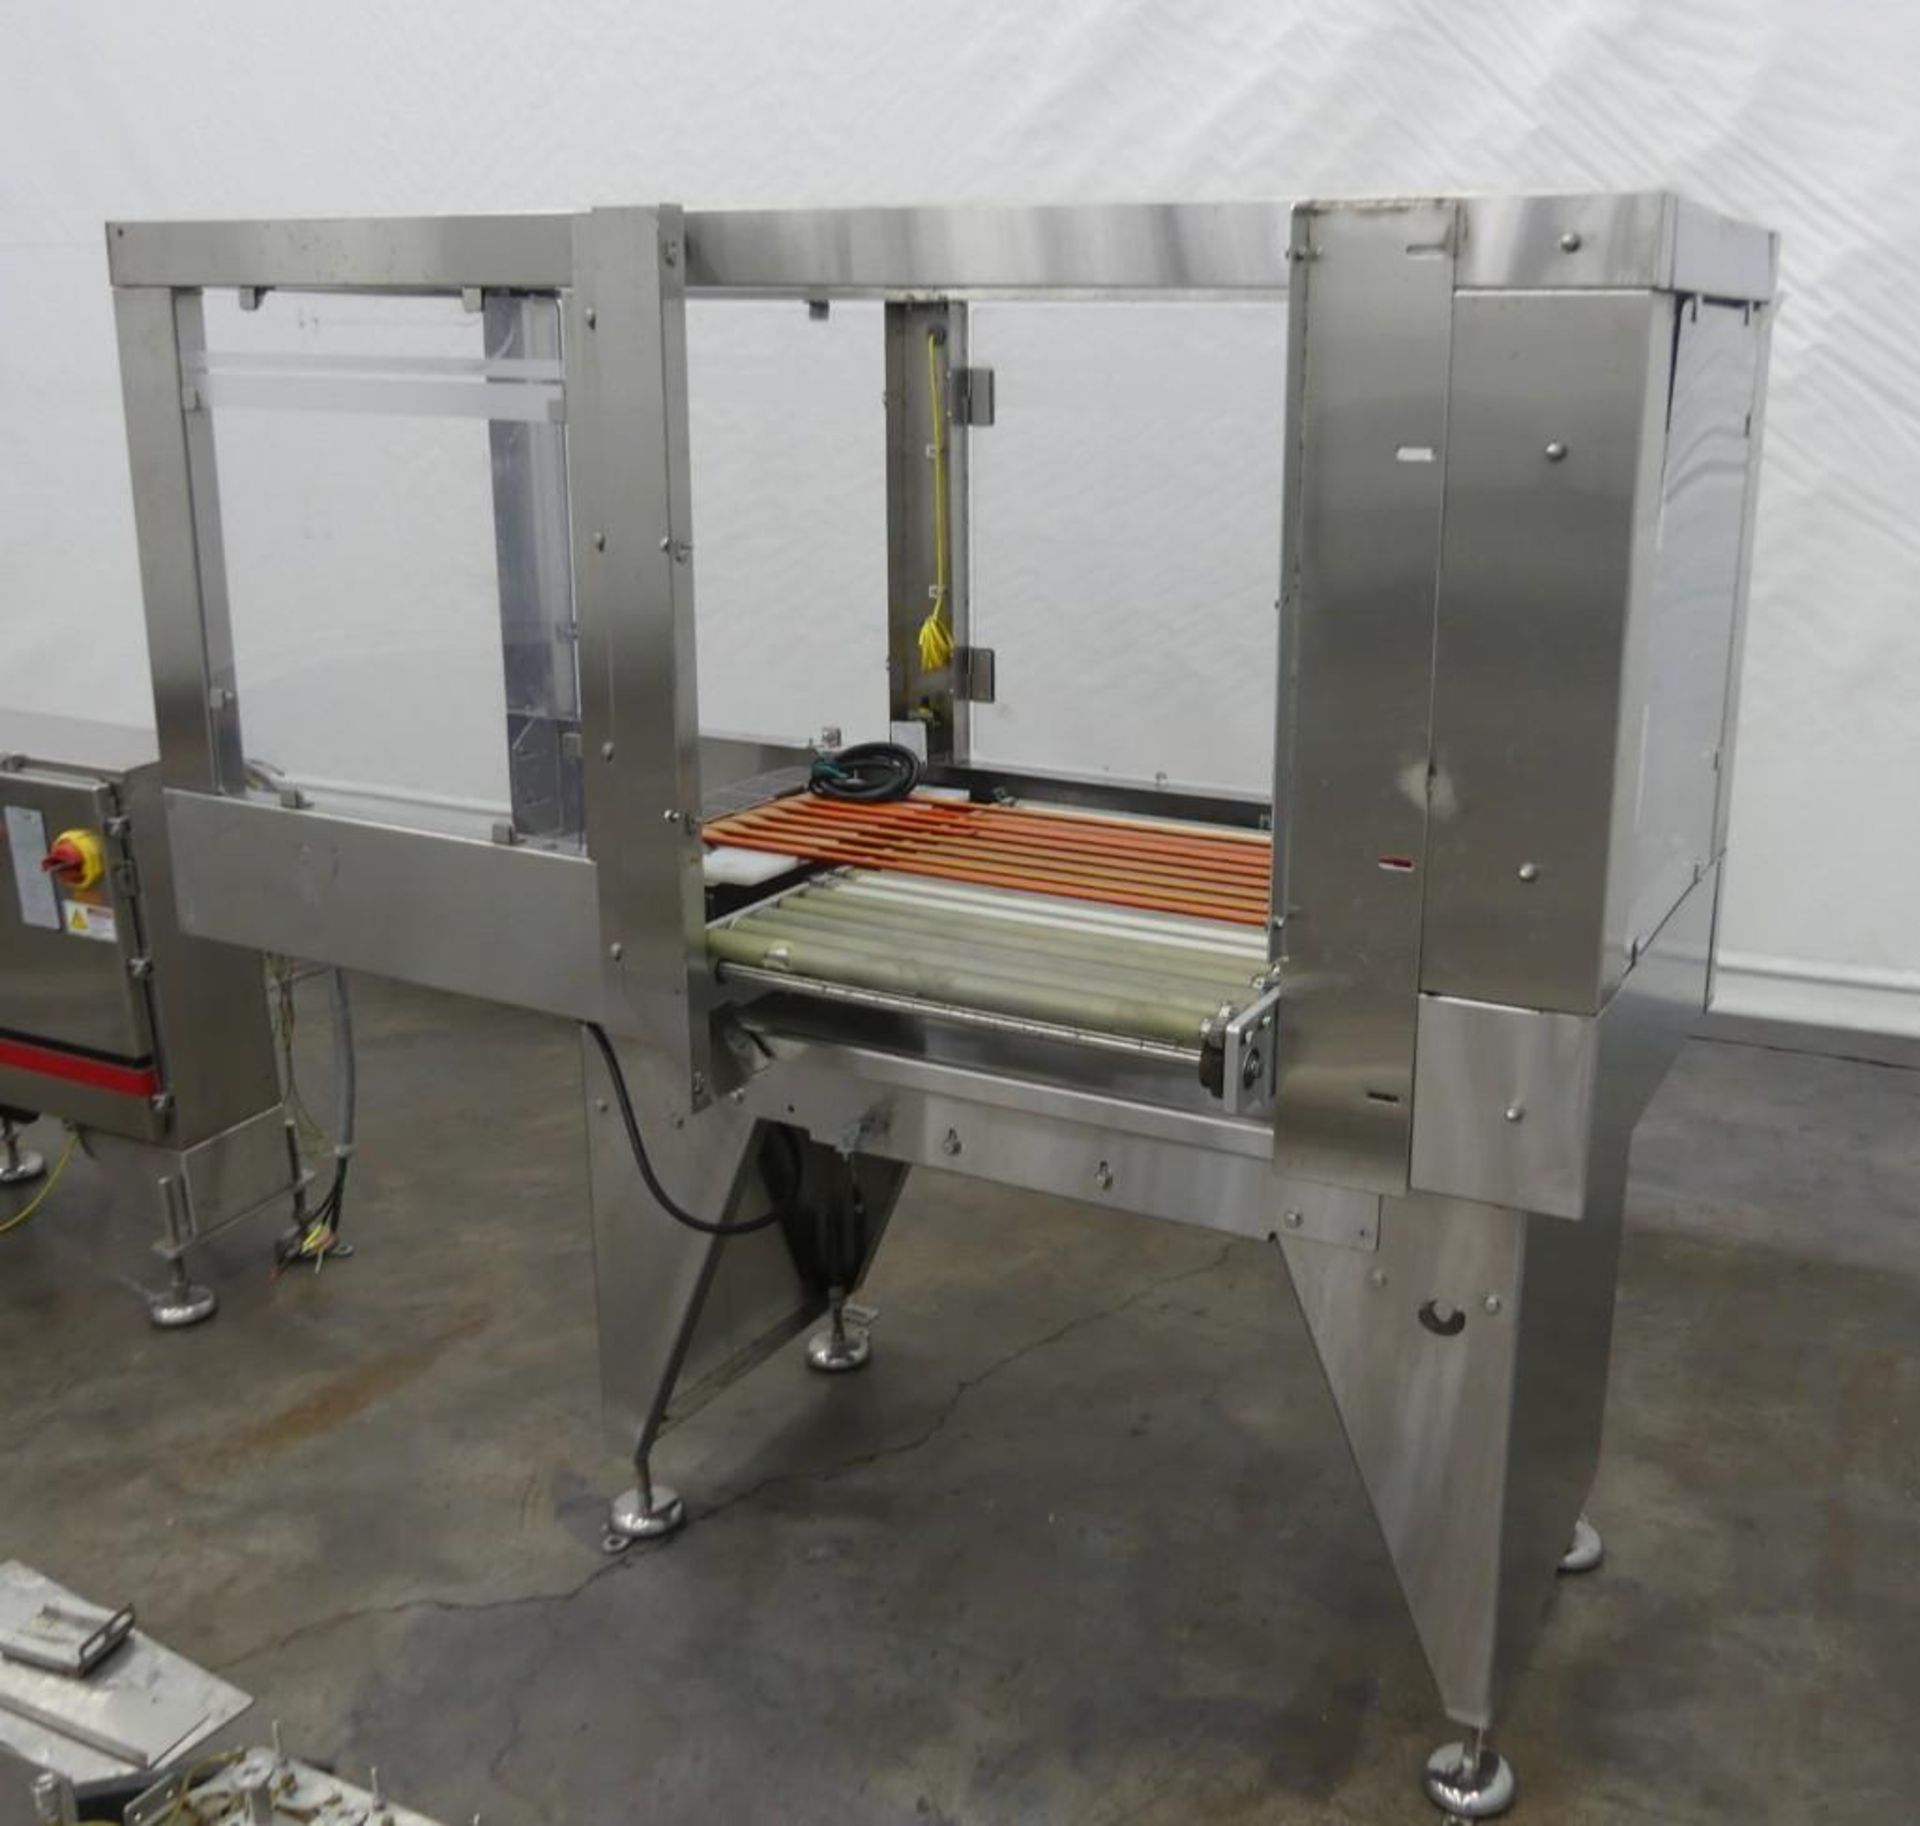 Arpac Delkor Spot-Pak 112-SS-24 Automatic Stainless Steel Shrink Bundler - Image 92 of 101